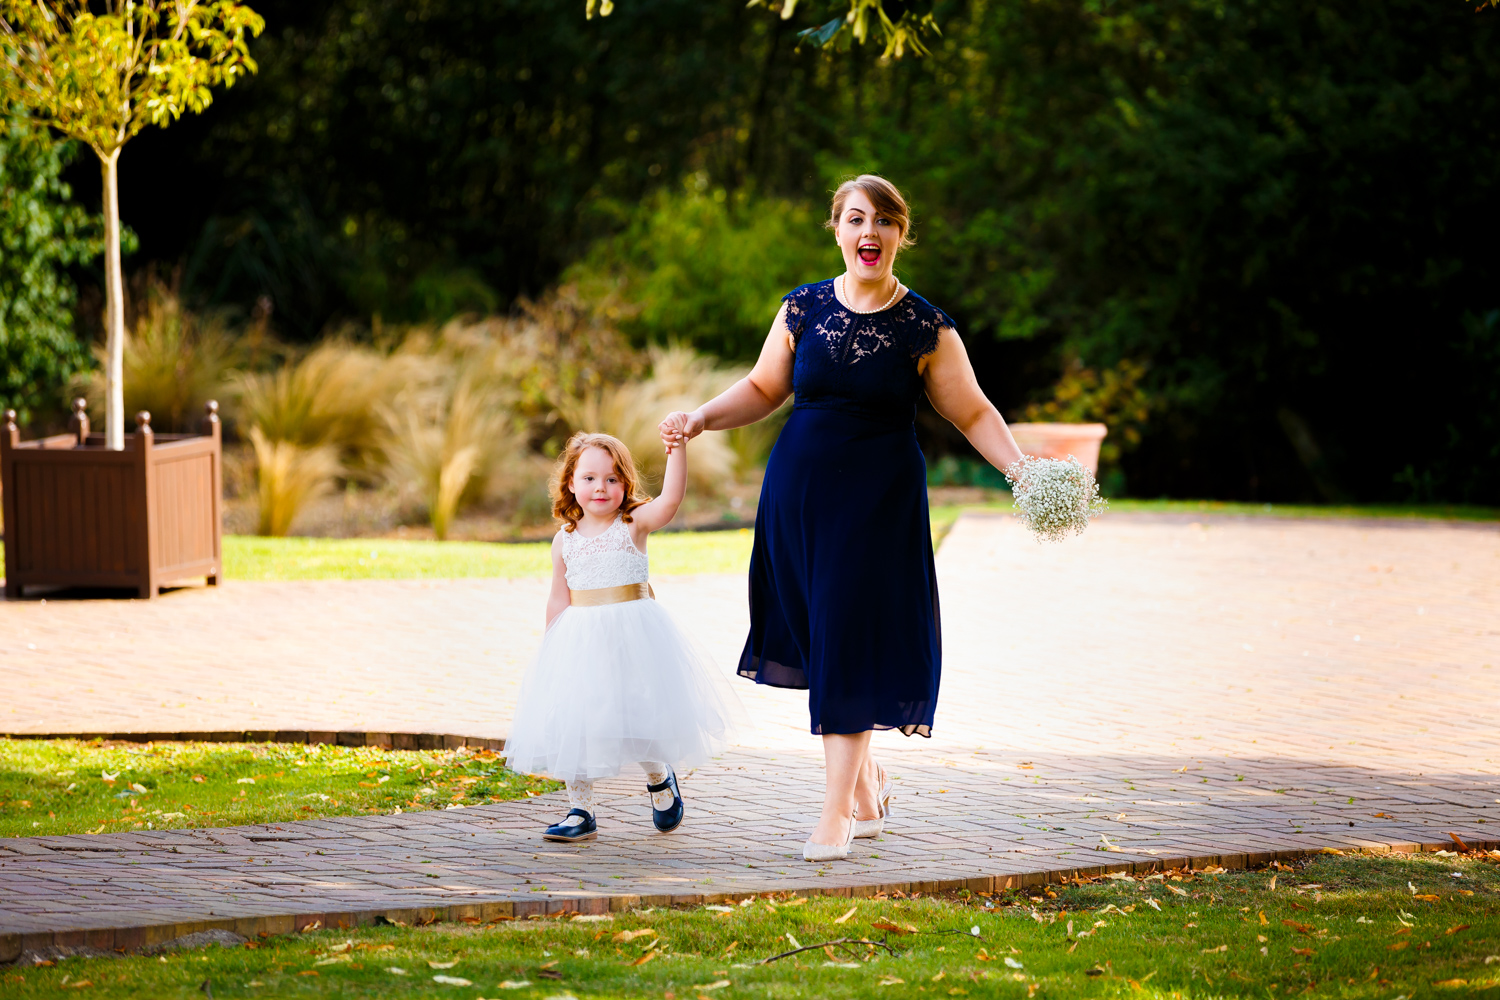 Flower girl and bridesmaid walking hand in hand